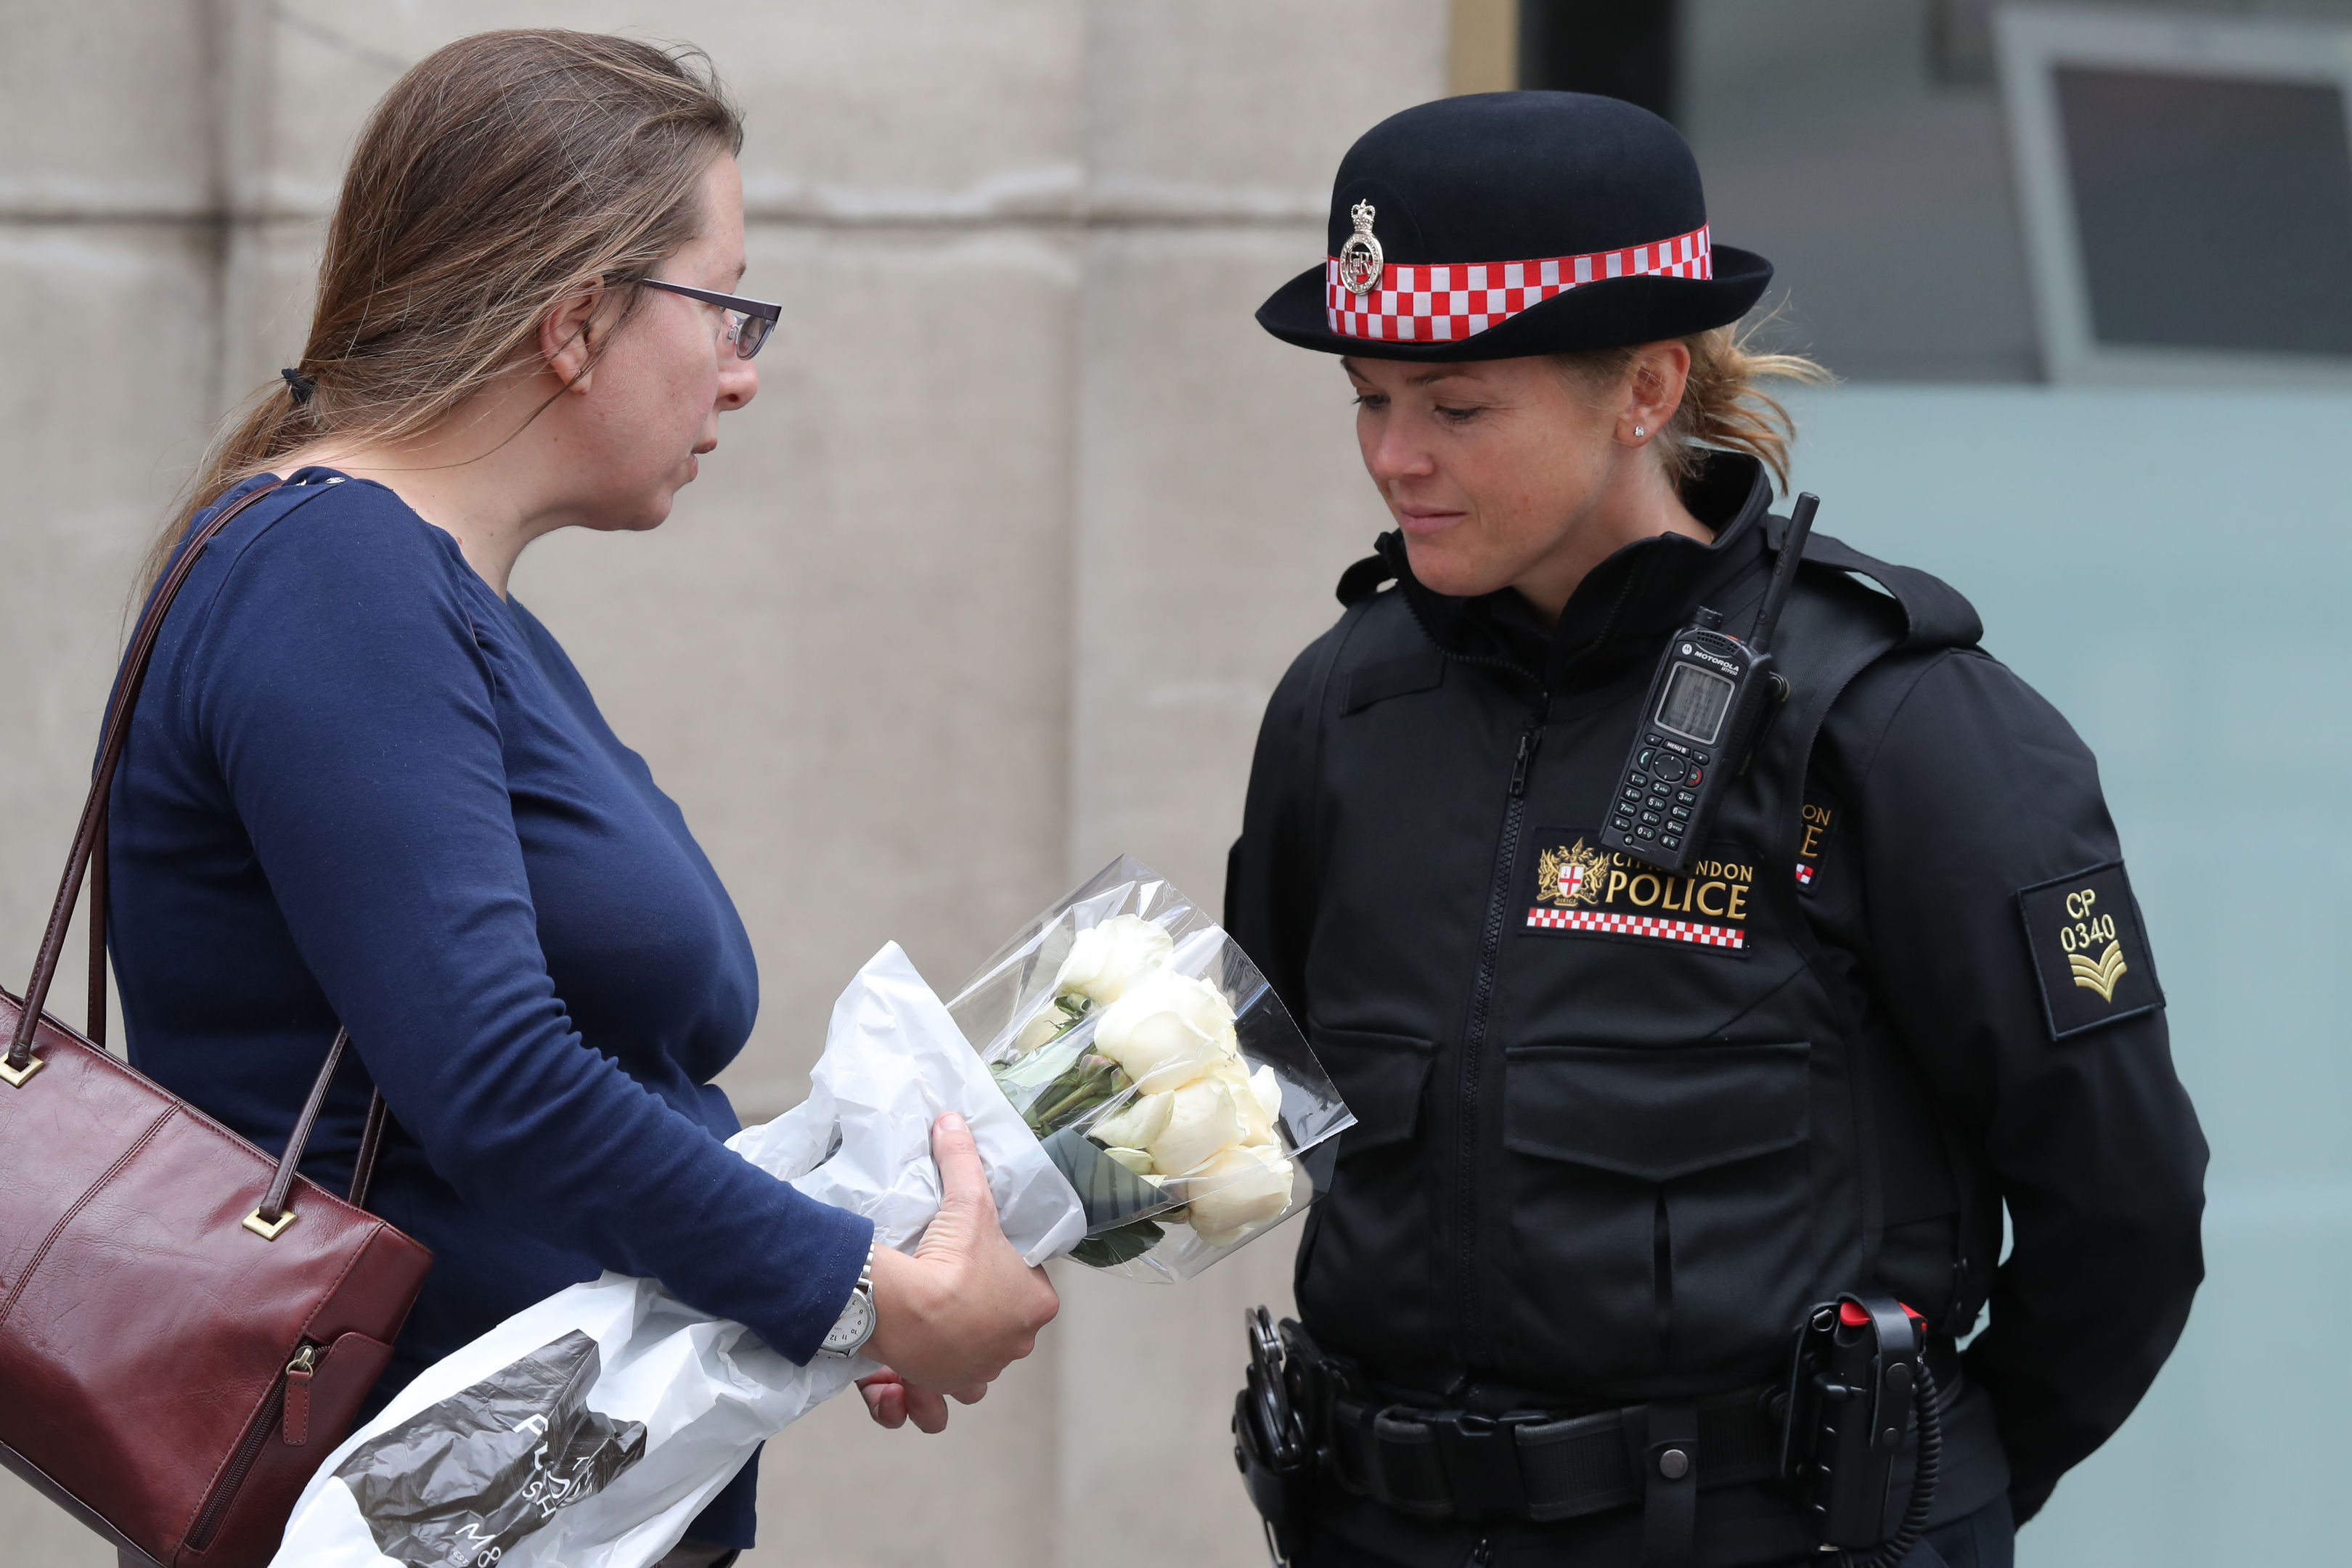 A member of the public speaks to a police officer as she brings flowers to lay on the north side of London Bridge following last night's terrorist incident (Andrew Matthews/PA Wire)